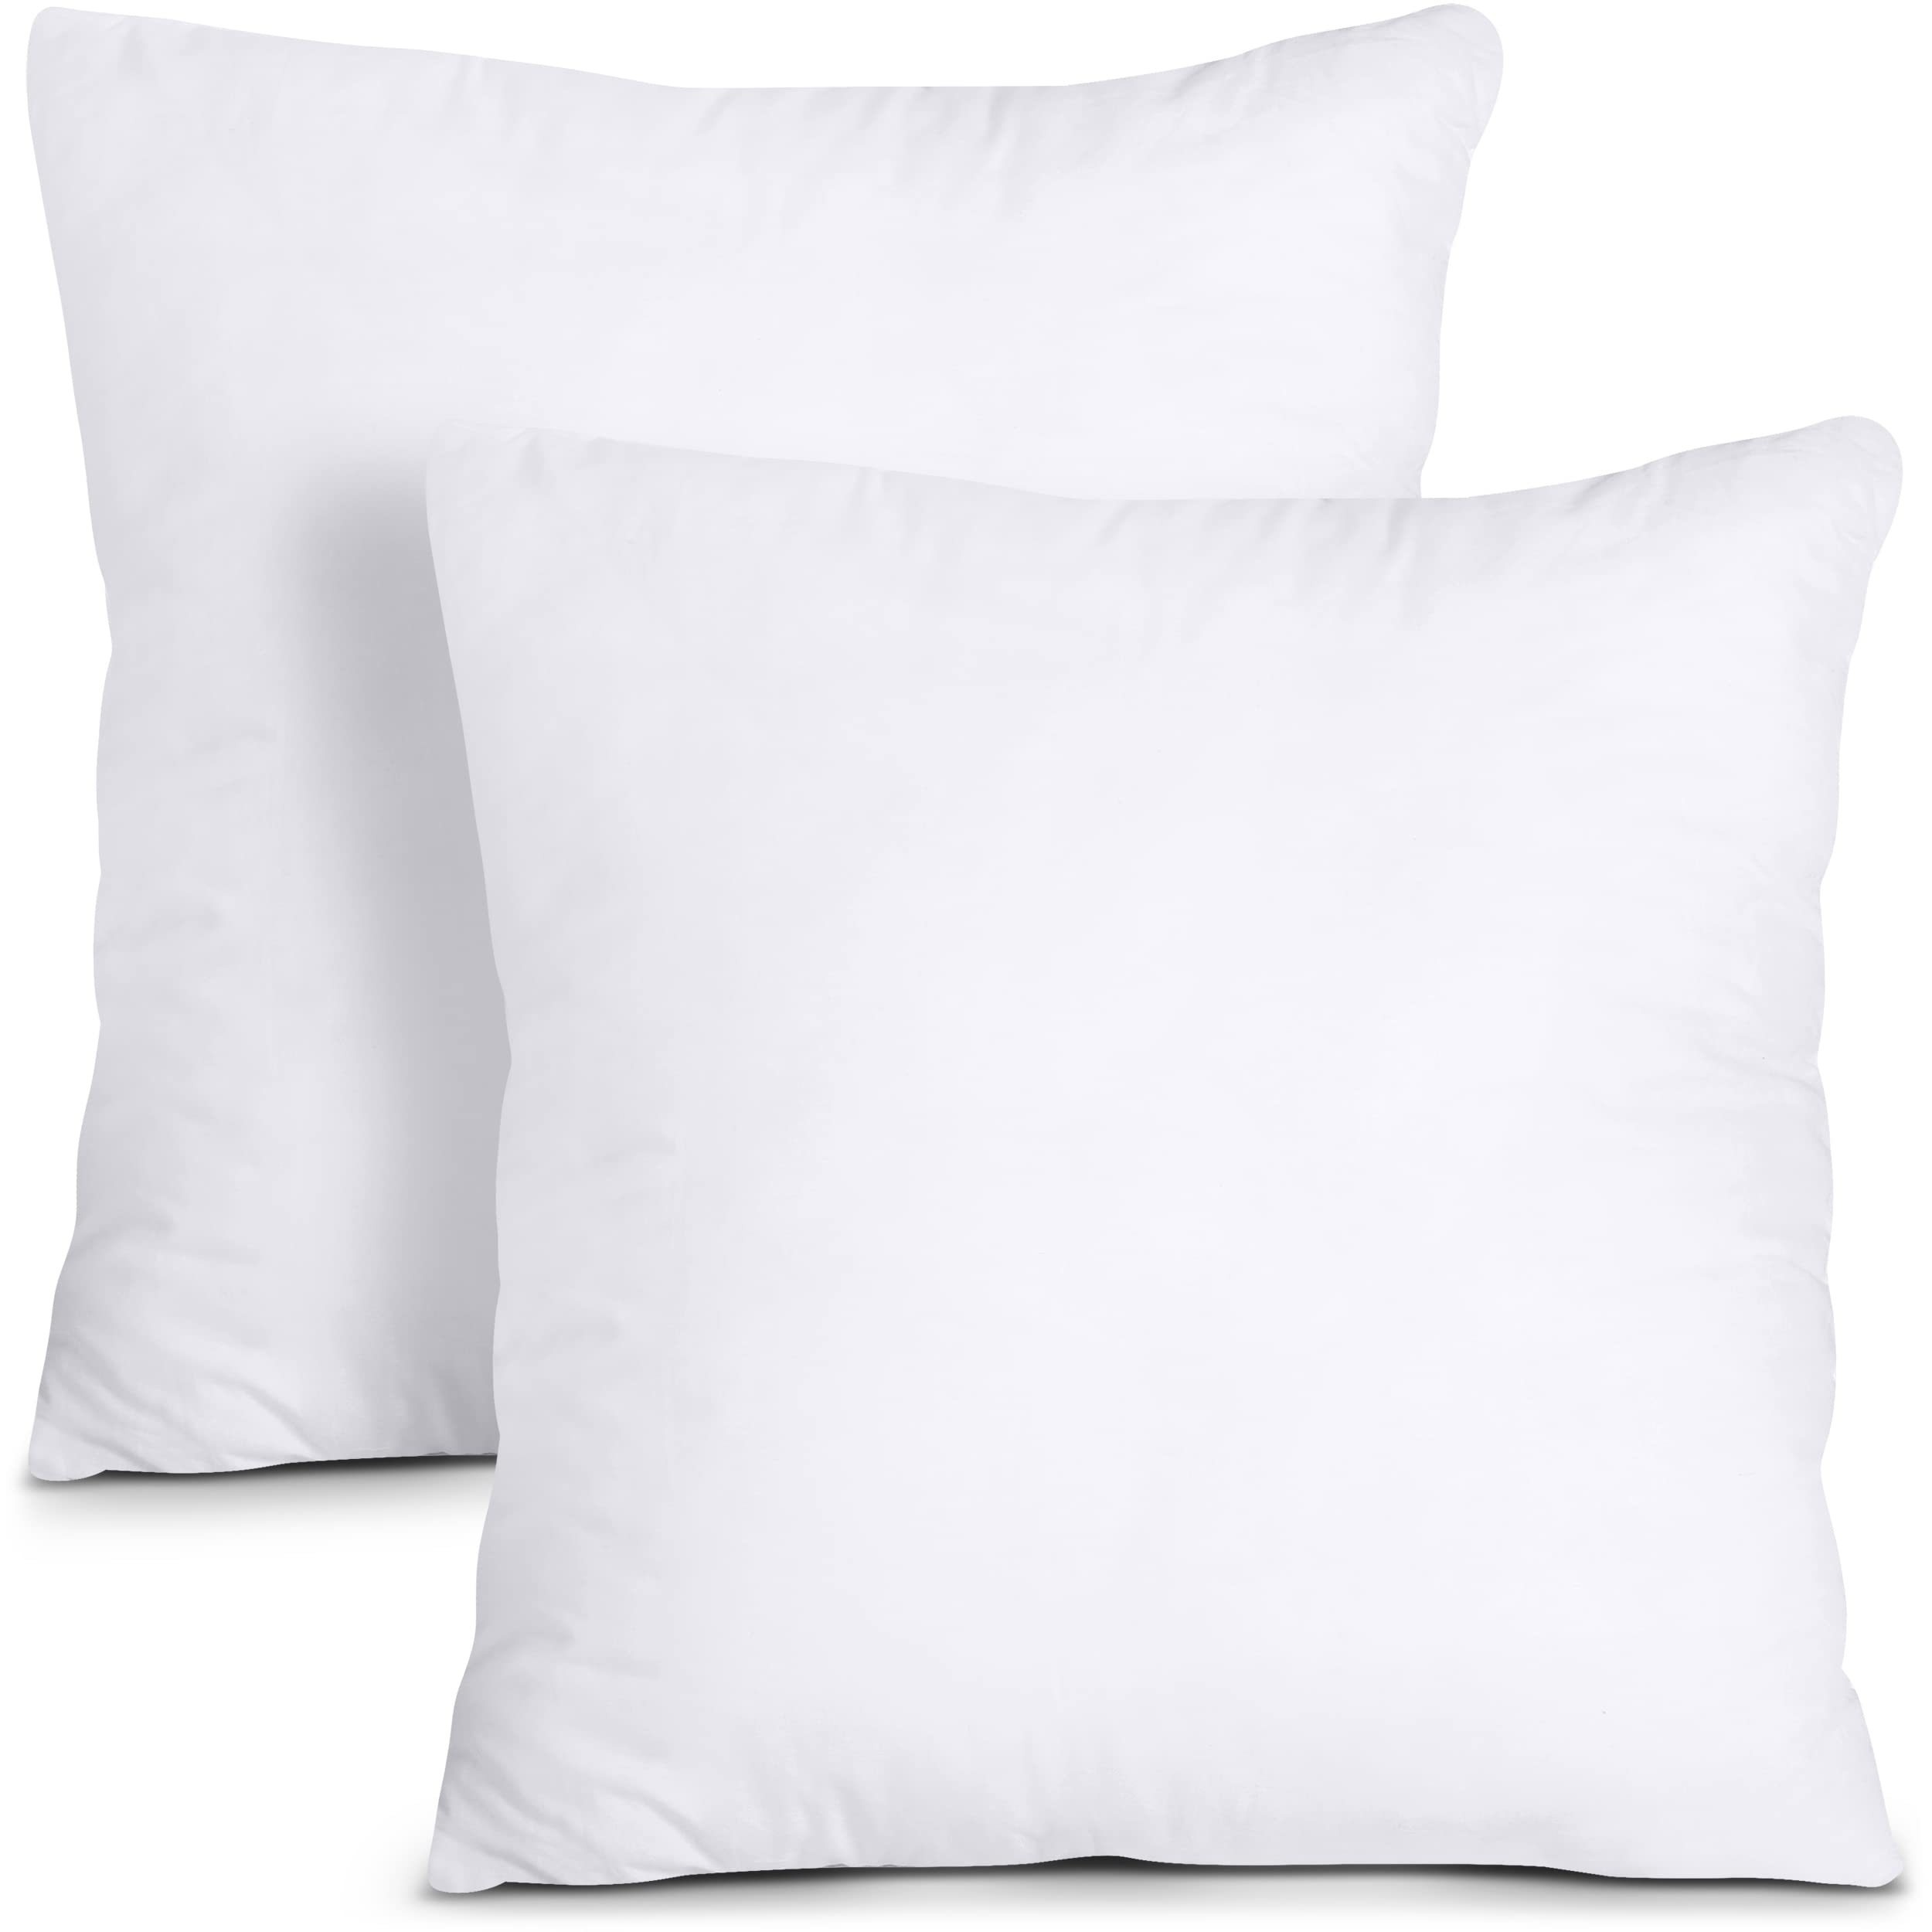 

Classic Style Decorative Bedding Pillow Inserts, 2 Pcs Square Polyester Fill Throw Pillows With Zipper Closure, Machine Washable, All-season Multipurpose Cushions For Sofa, Bed, And Couch